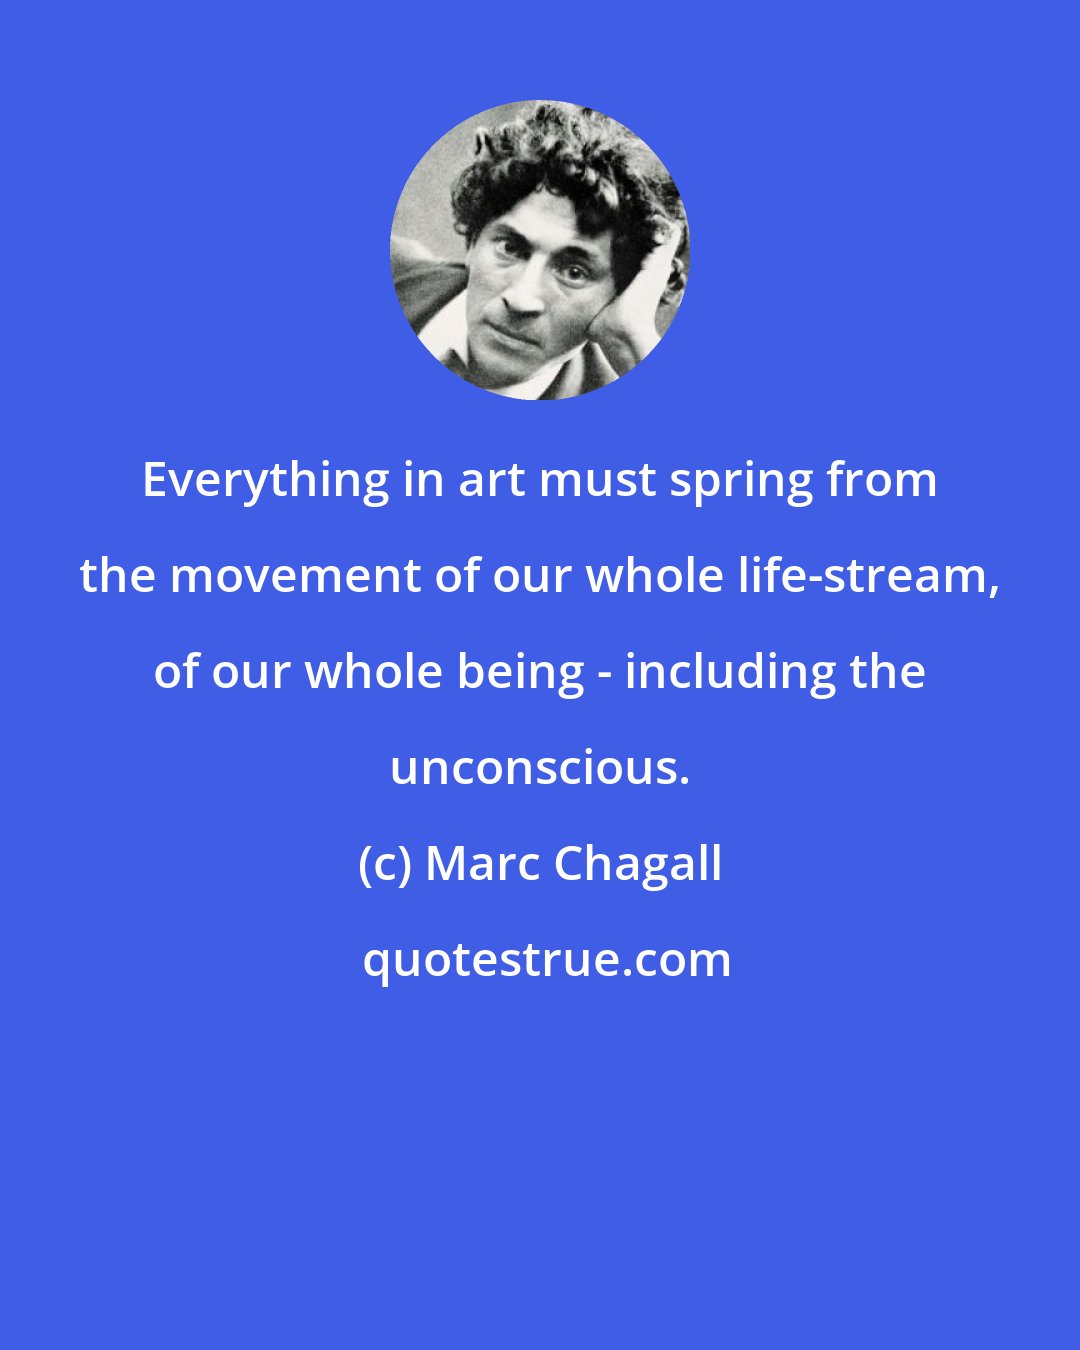 Marc Chagall: Everything in art must spring from the movement of our whole life-stream, of our whole being - including the unconscious.